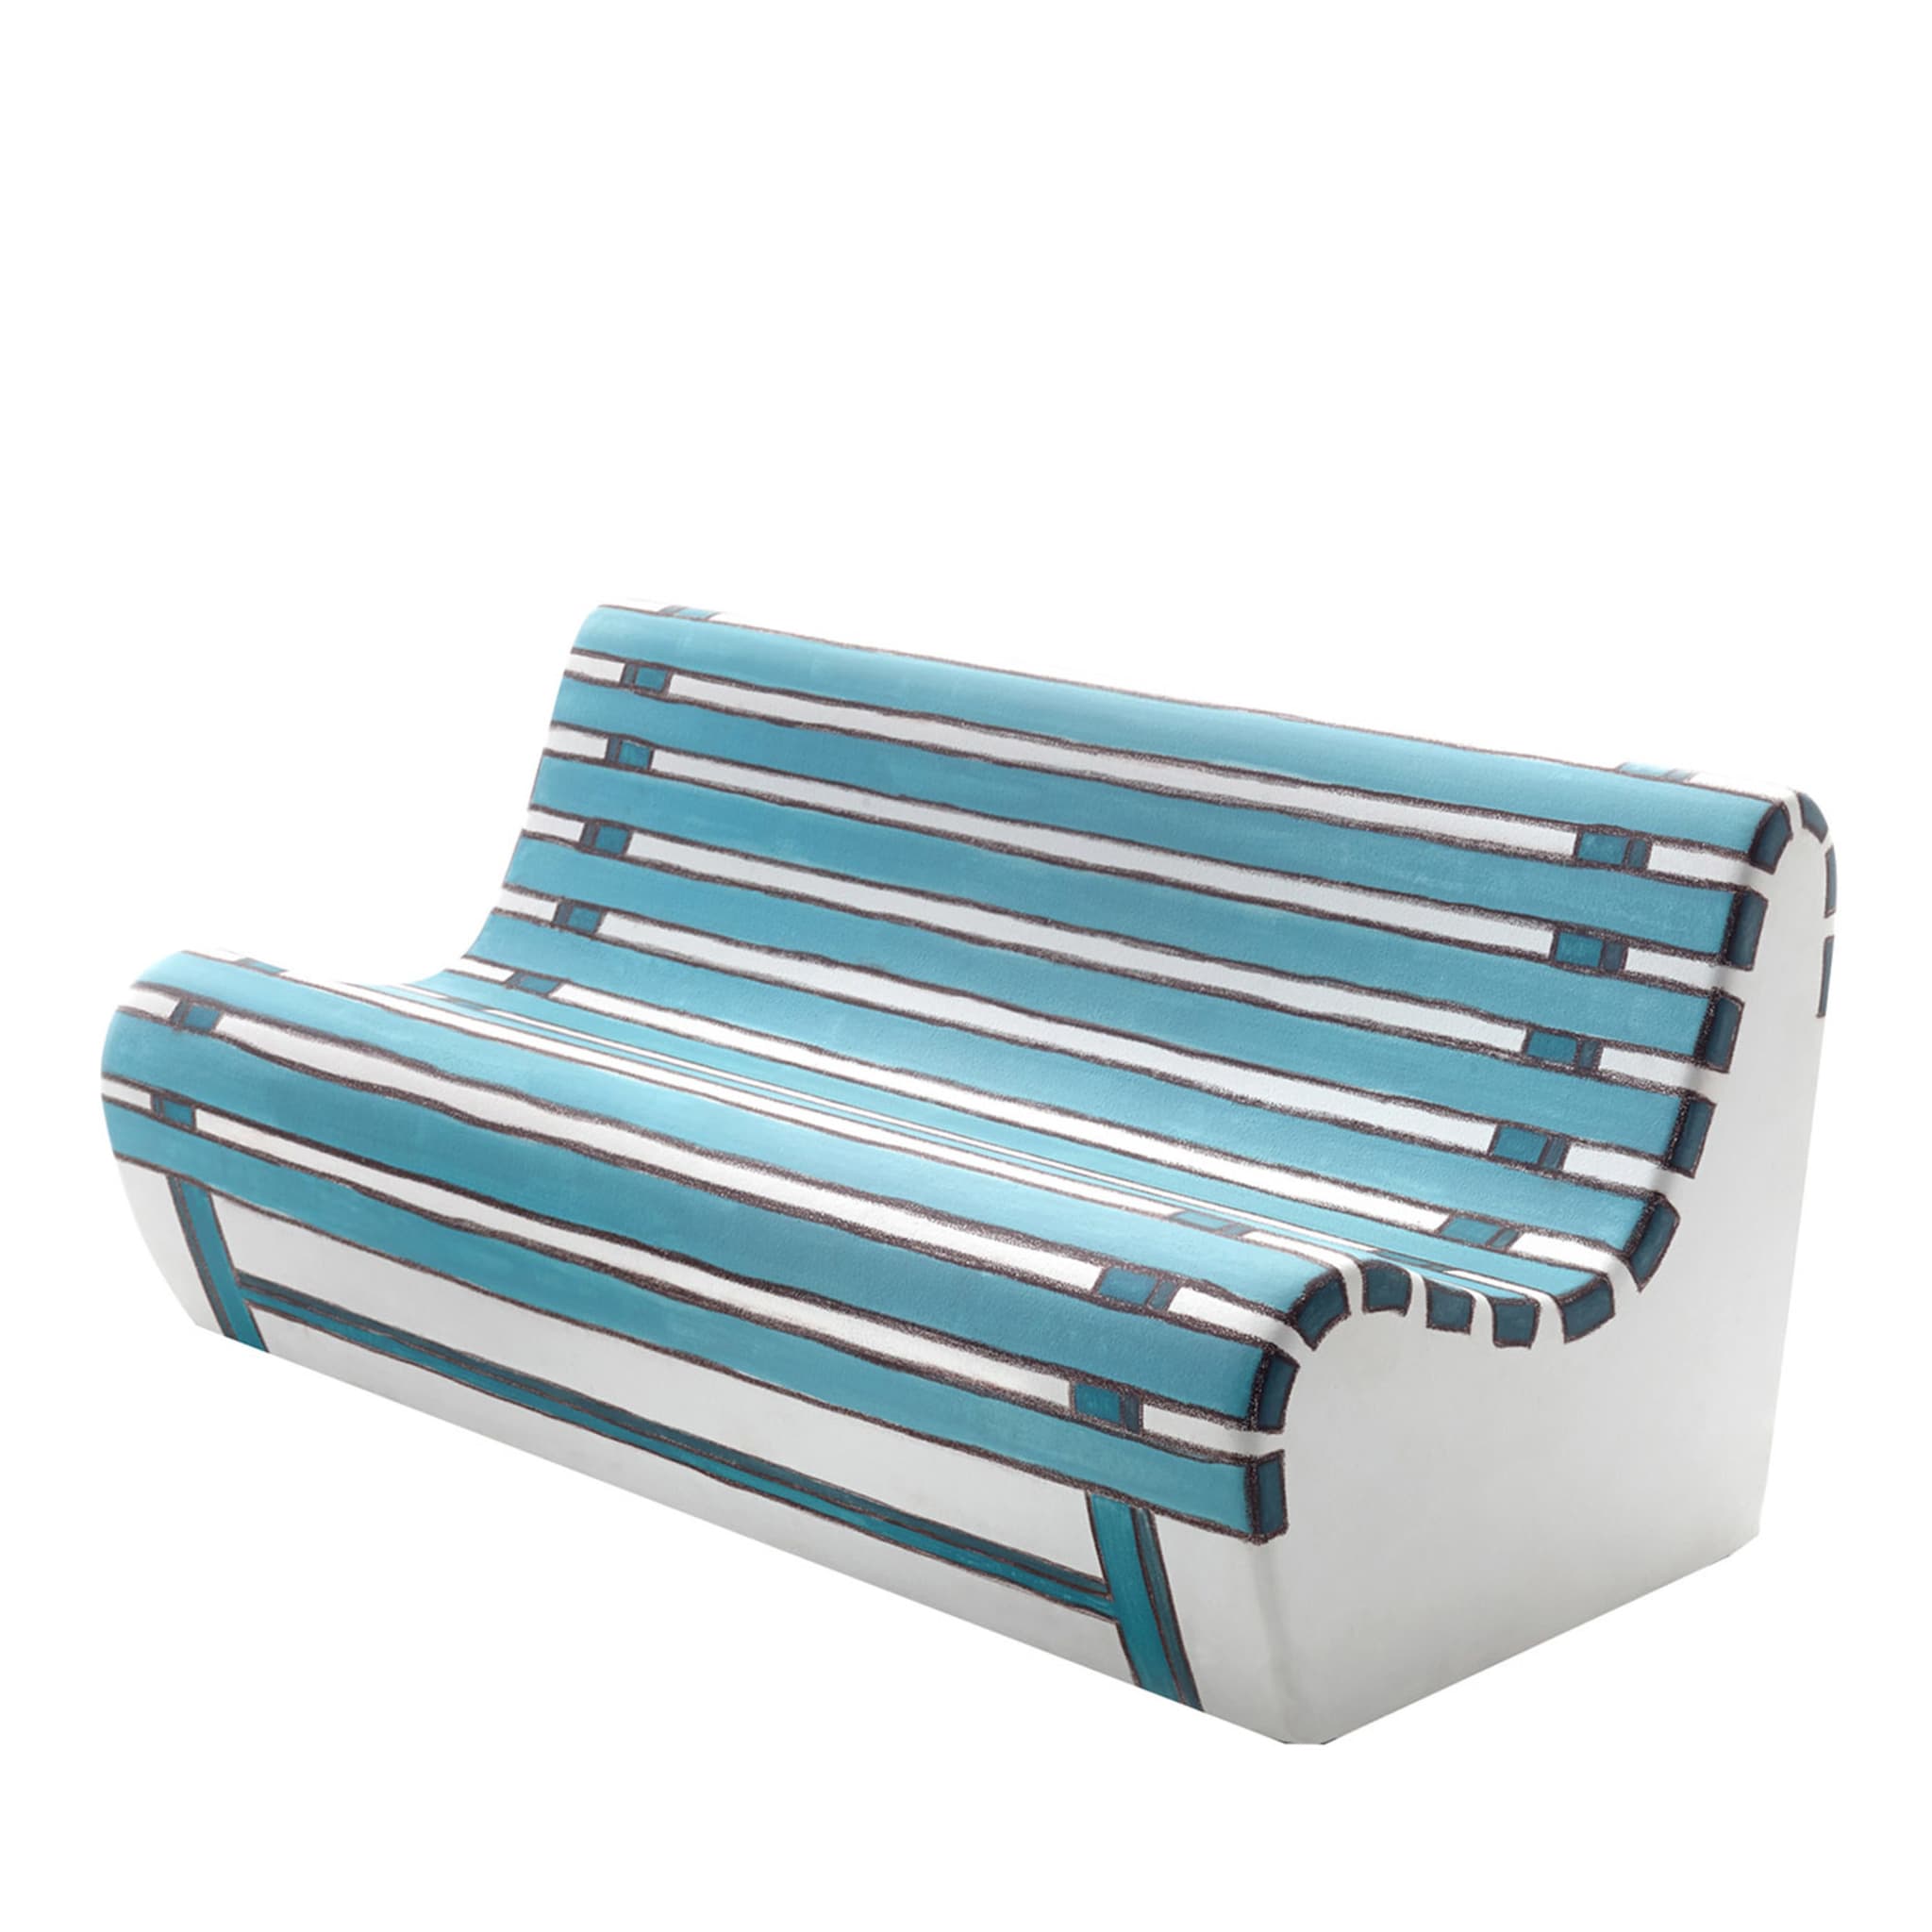 Summertime Limited Edition Sofa by Valerio Berruti - Main view